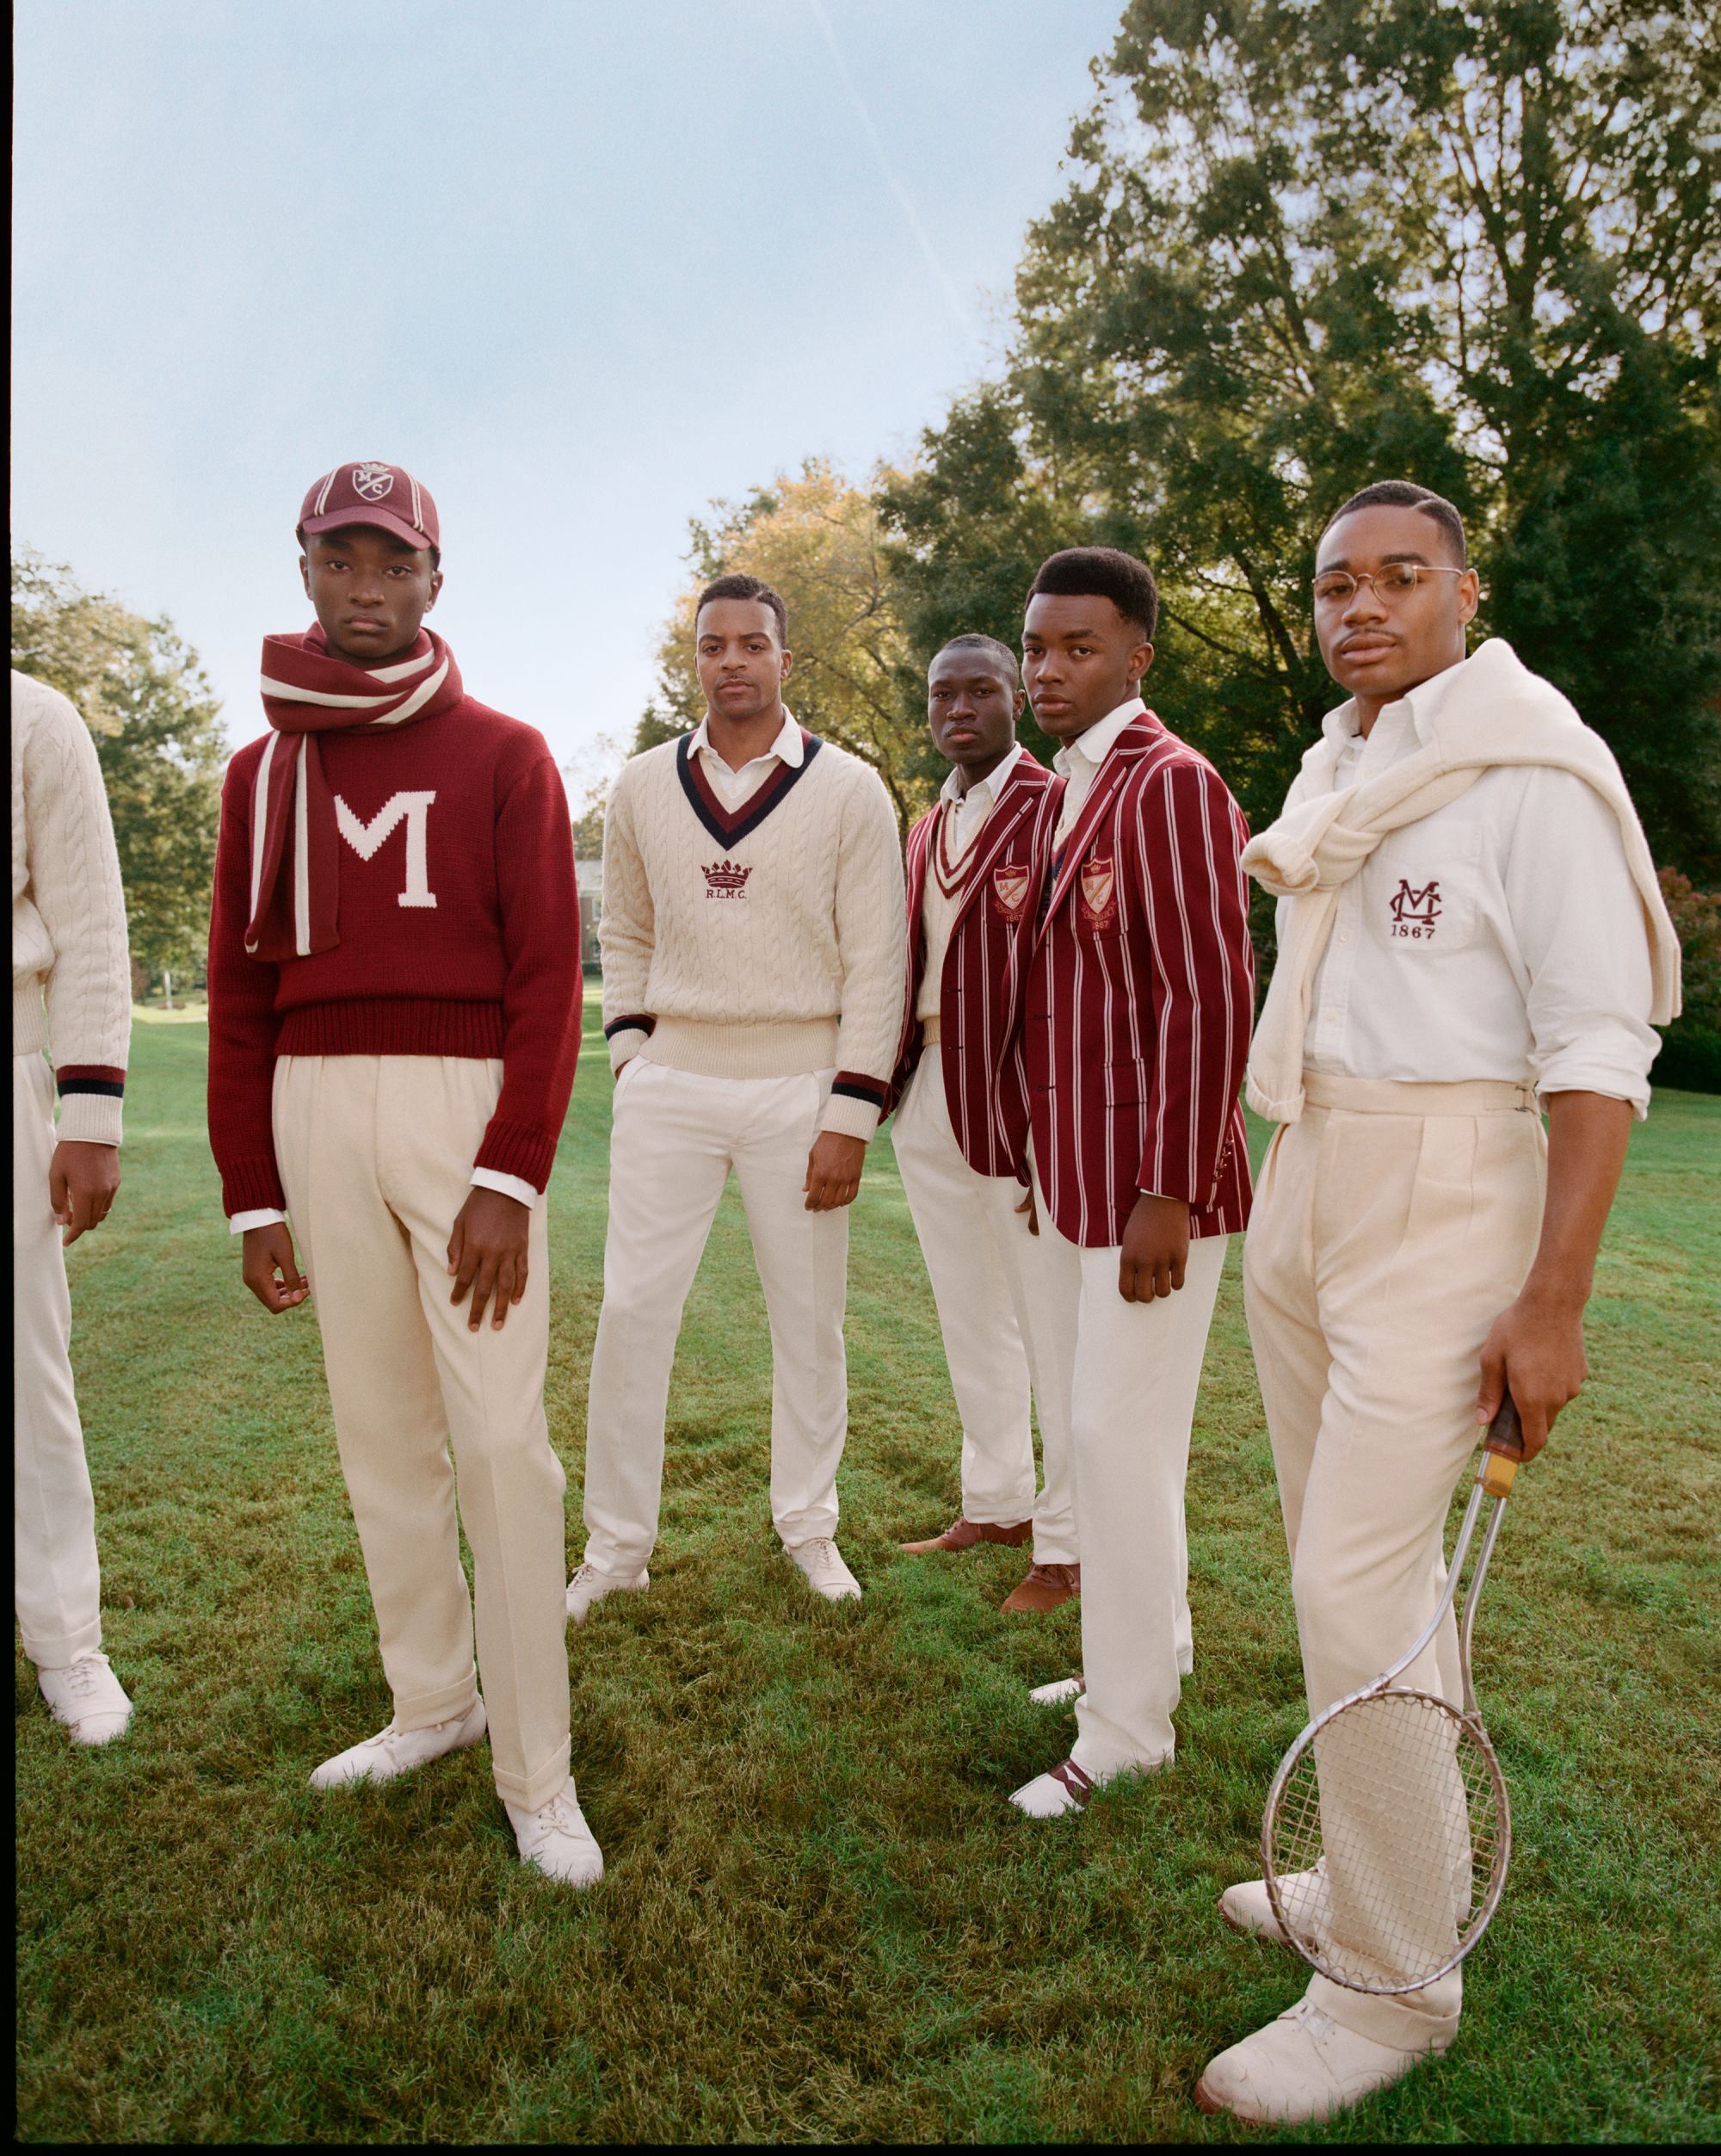 A new Ralph Lauren collection draws on the collegiate style of elite HBCUs  : NPR